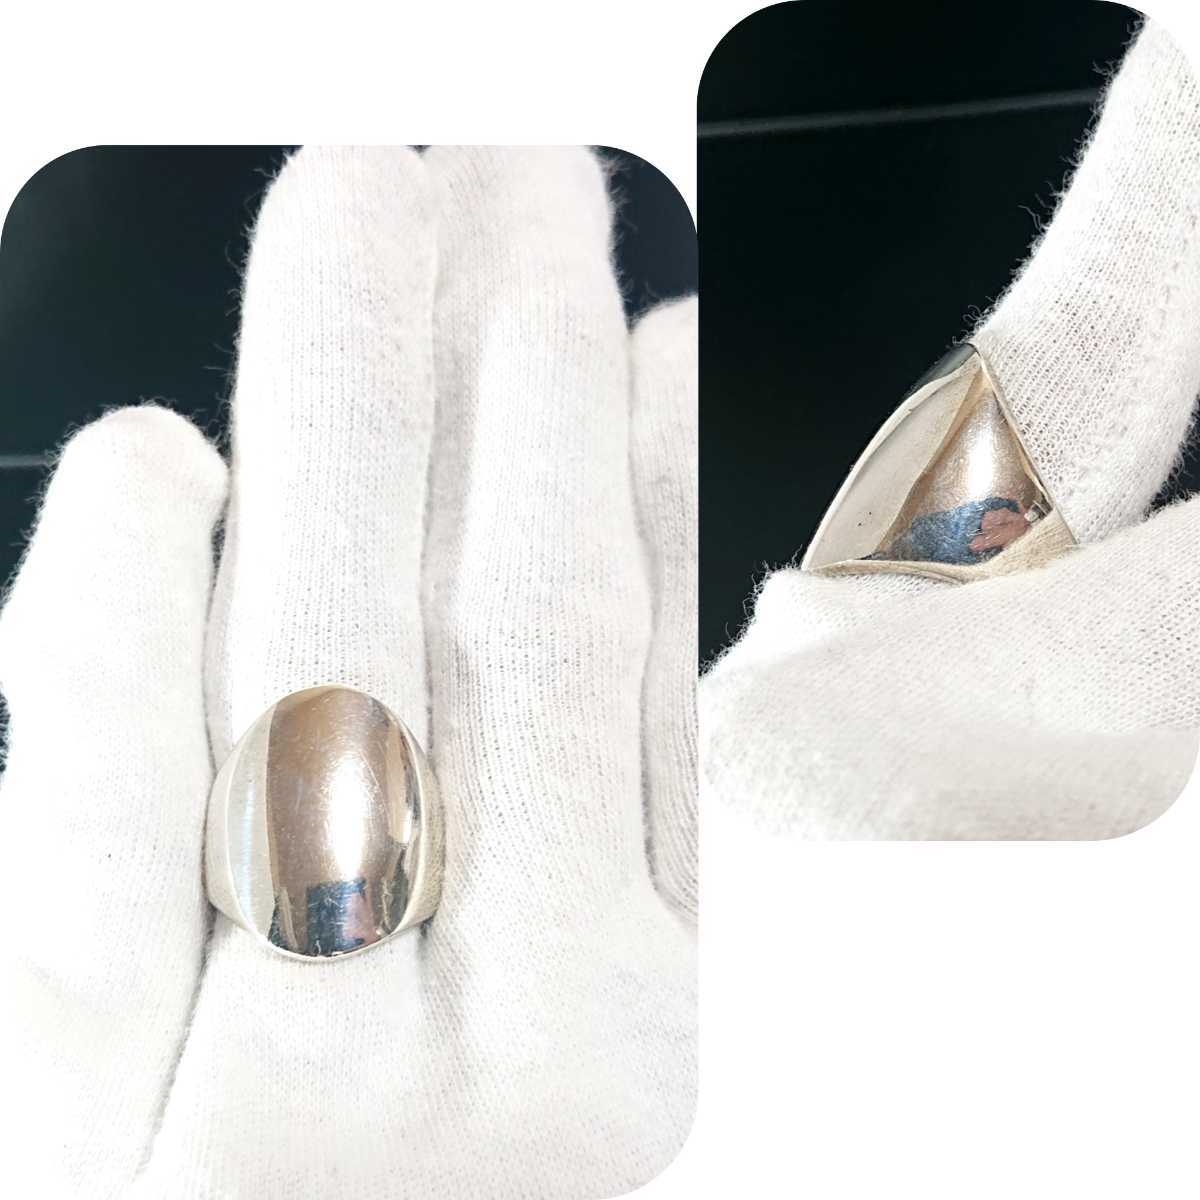 2157 SILVER925 signet ring 16 number silver 925 oval simple plain -ply thickness ellipse unisex sig net ring wide wide width Old 